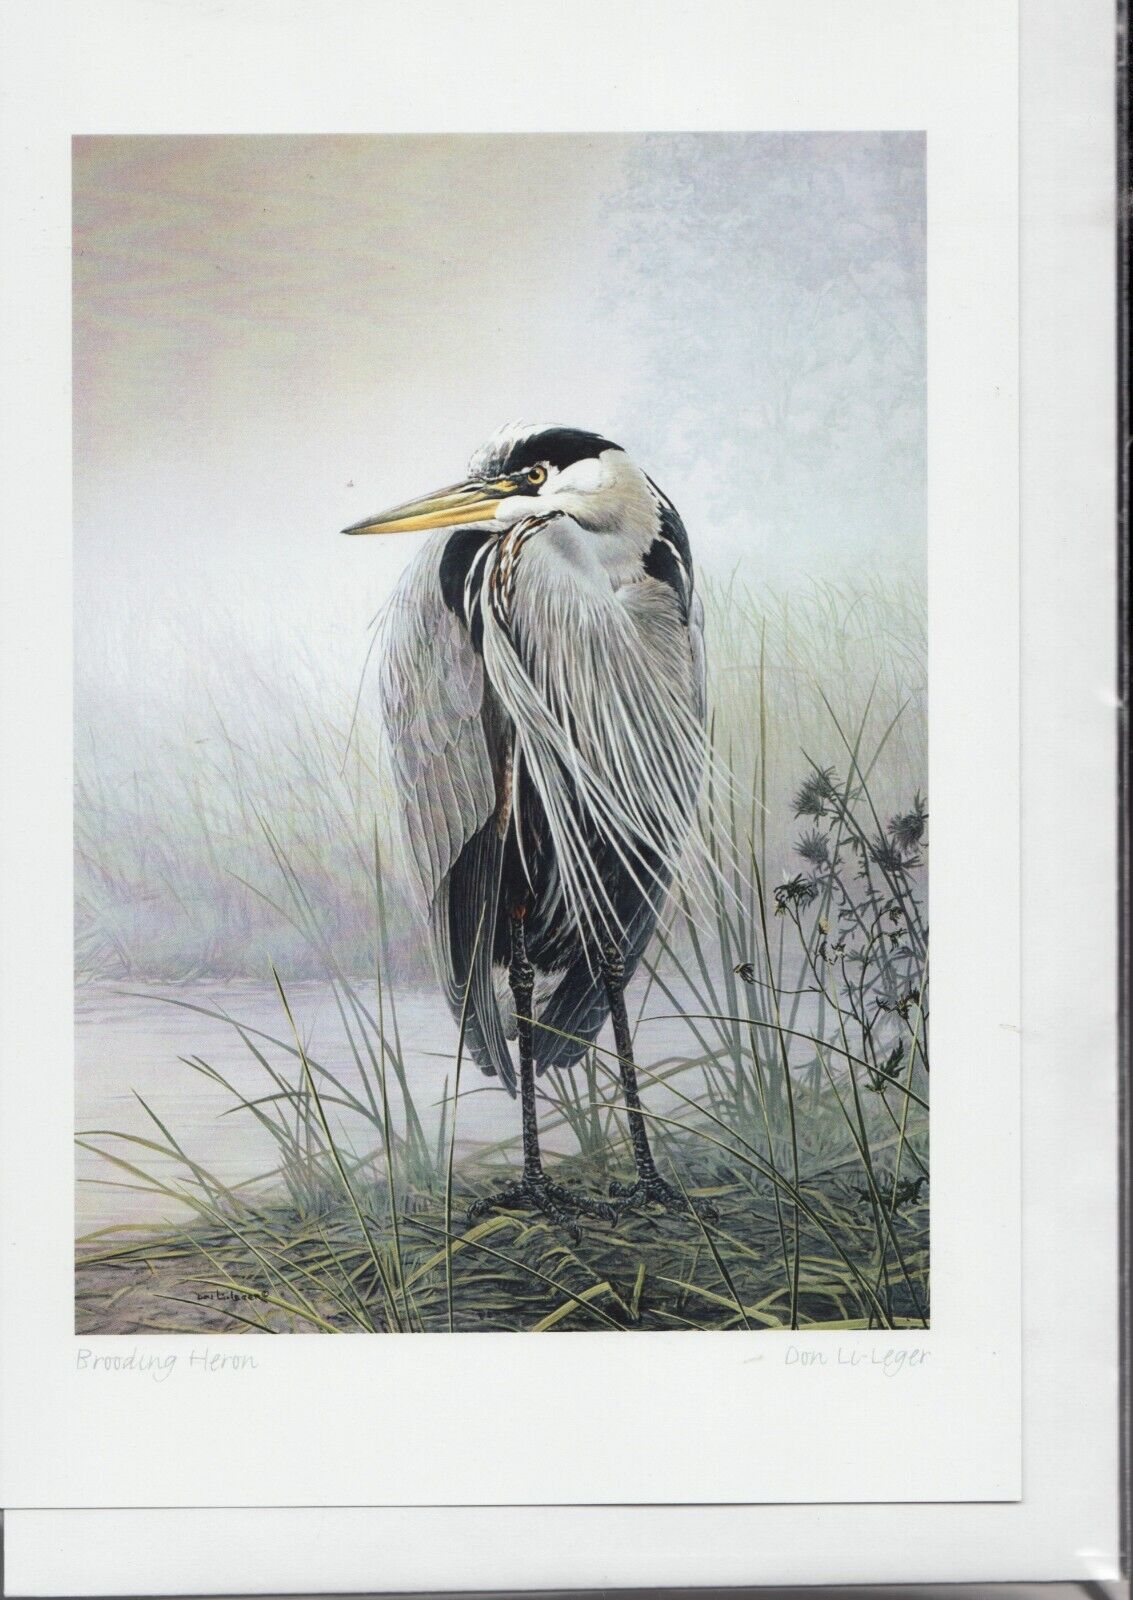 BROODING HERON - West Coast Nature by Don Li-Leger - New 6\